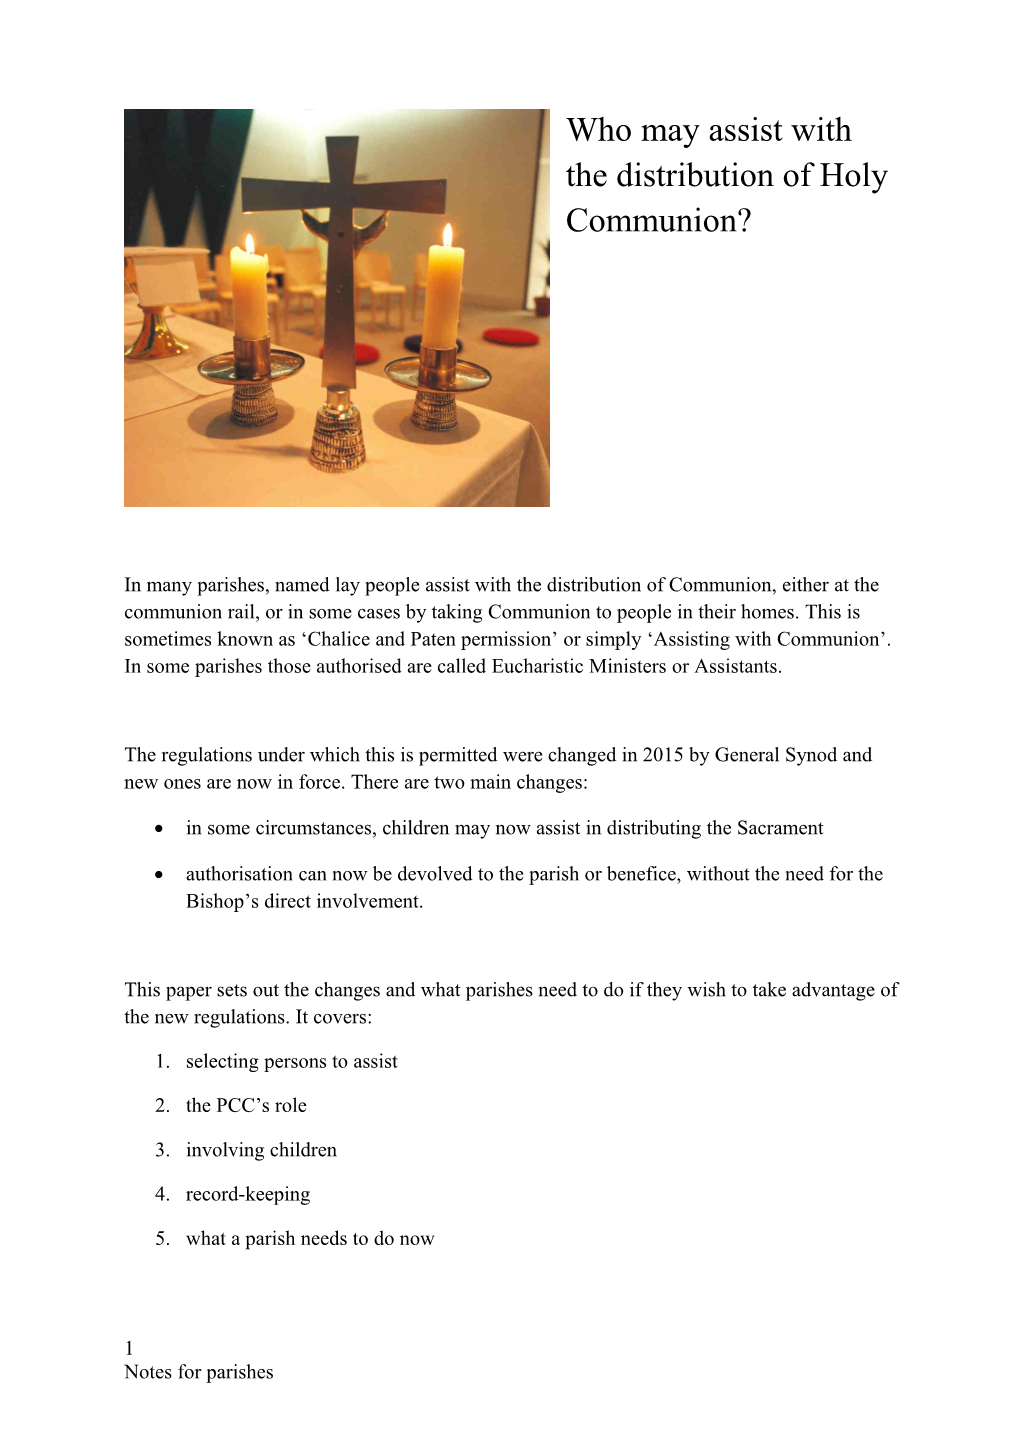 In Many Parishes, Named Lay People Assist with the Distribution of Communion, Either At